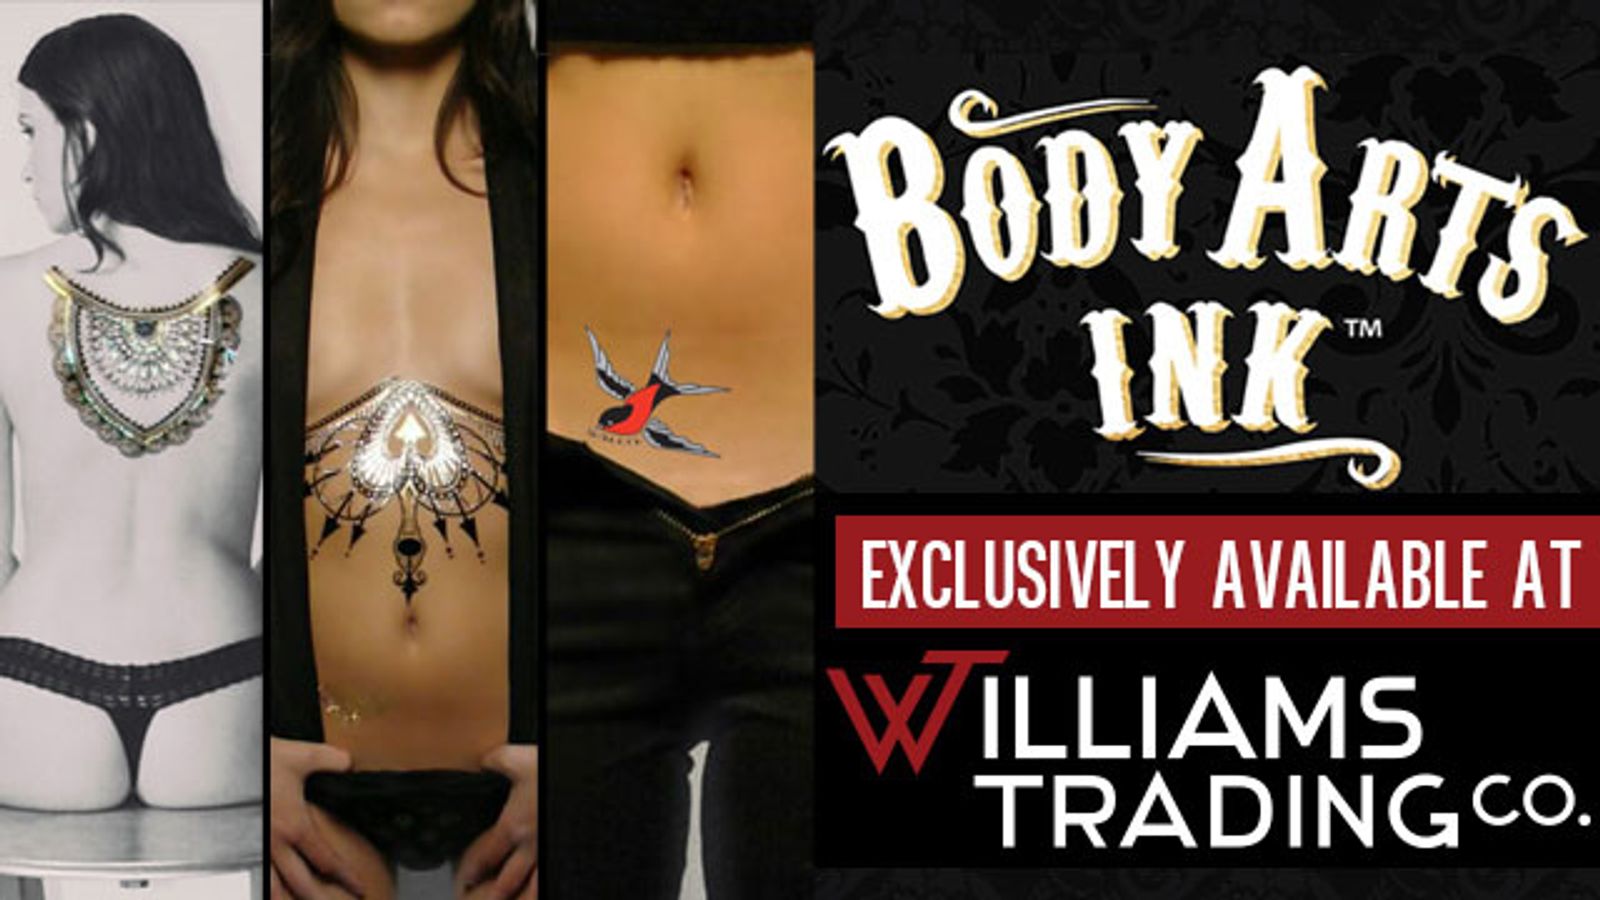 Williams Trading Co. Exclusive Distributor for Body Arts Ink